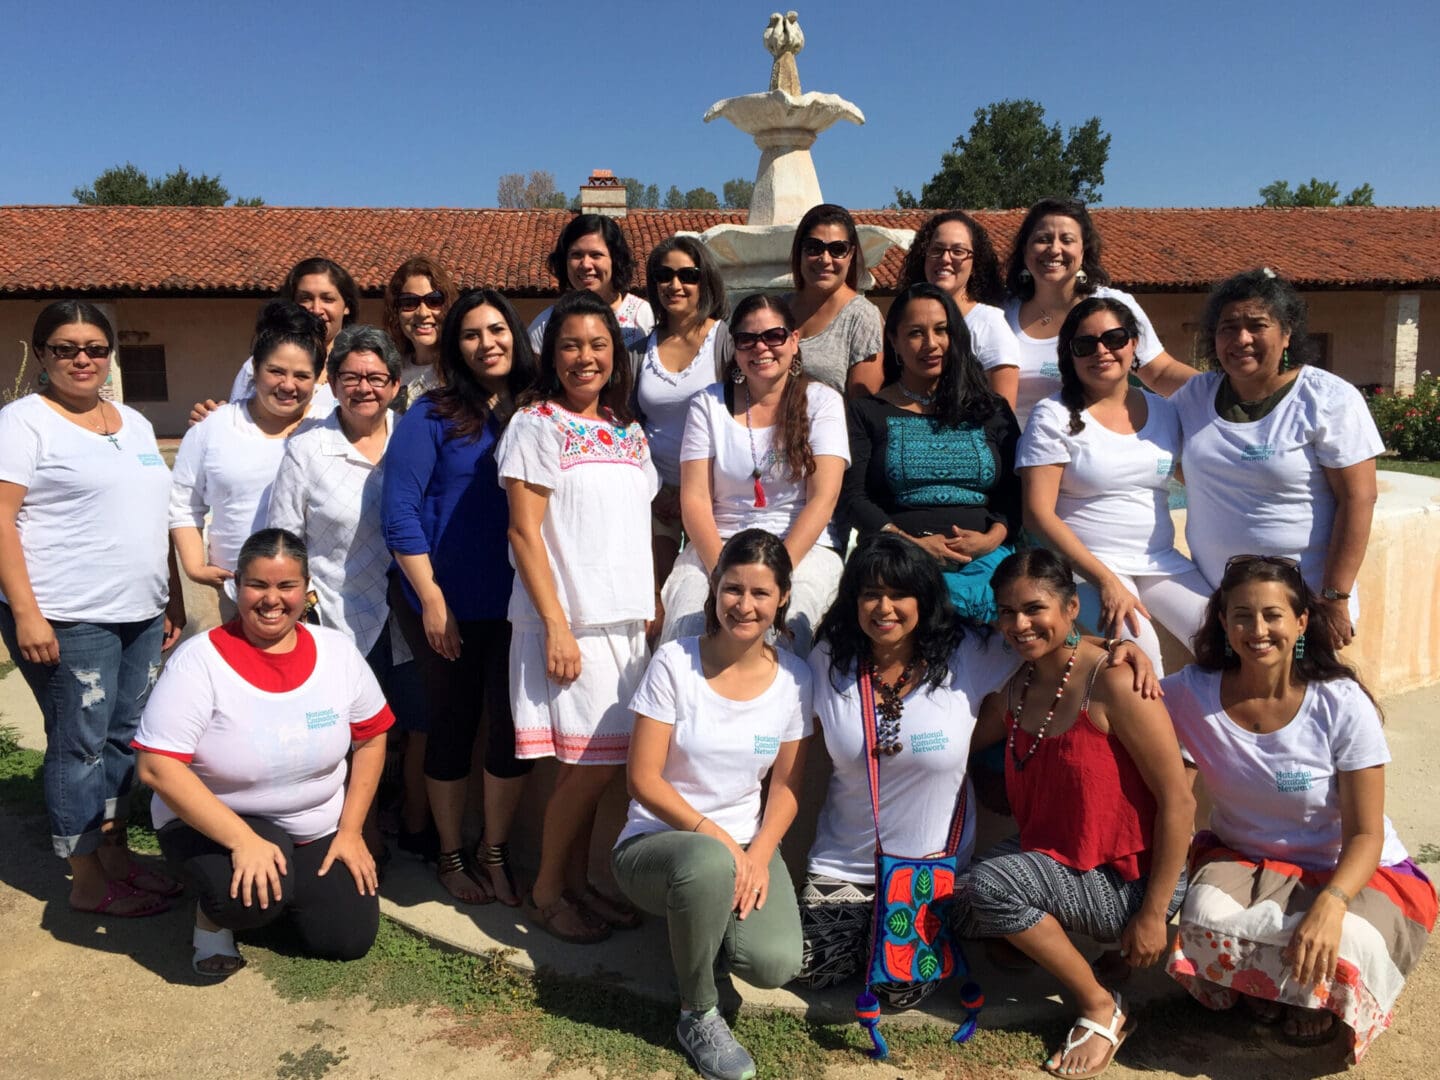 Attendees of the 2nd Annual National Comadres Retreat, Mission San Antonio de Padua, Jolon, California, August 9, 2015
